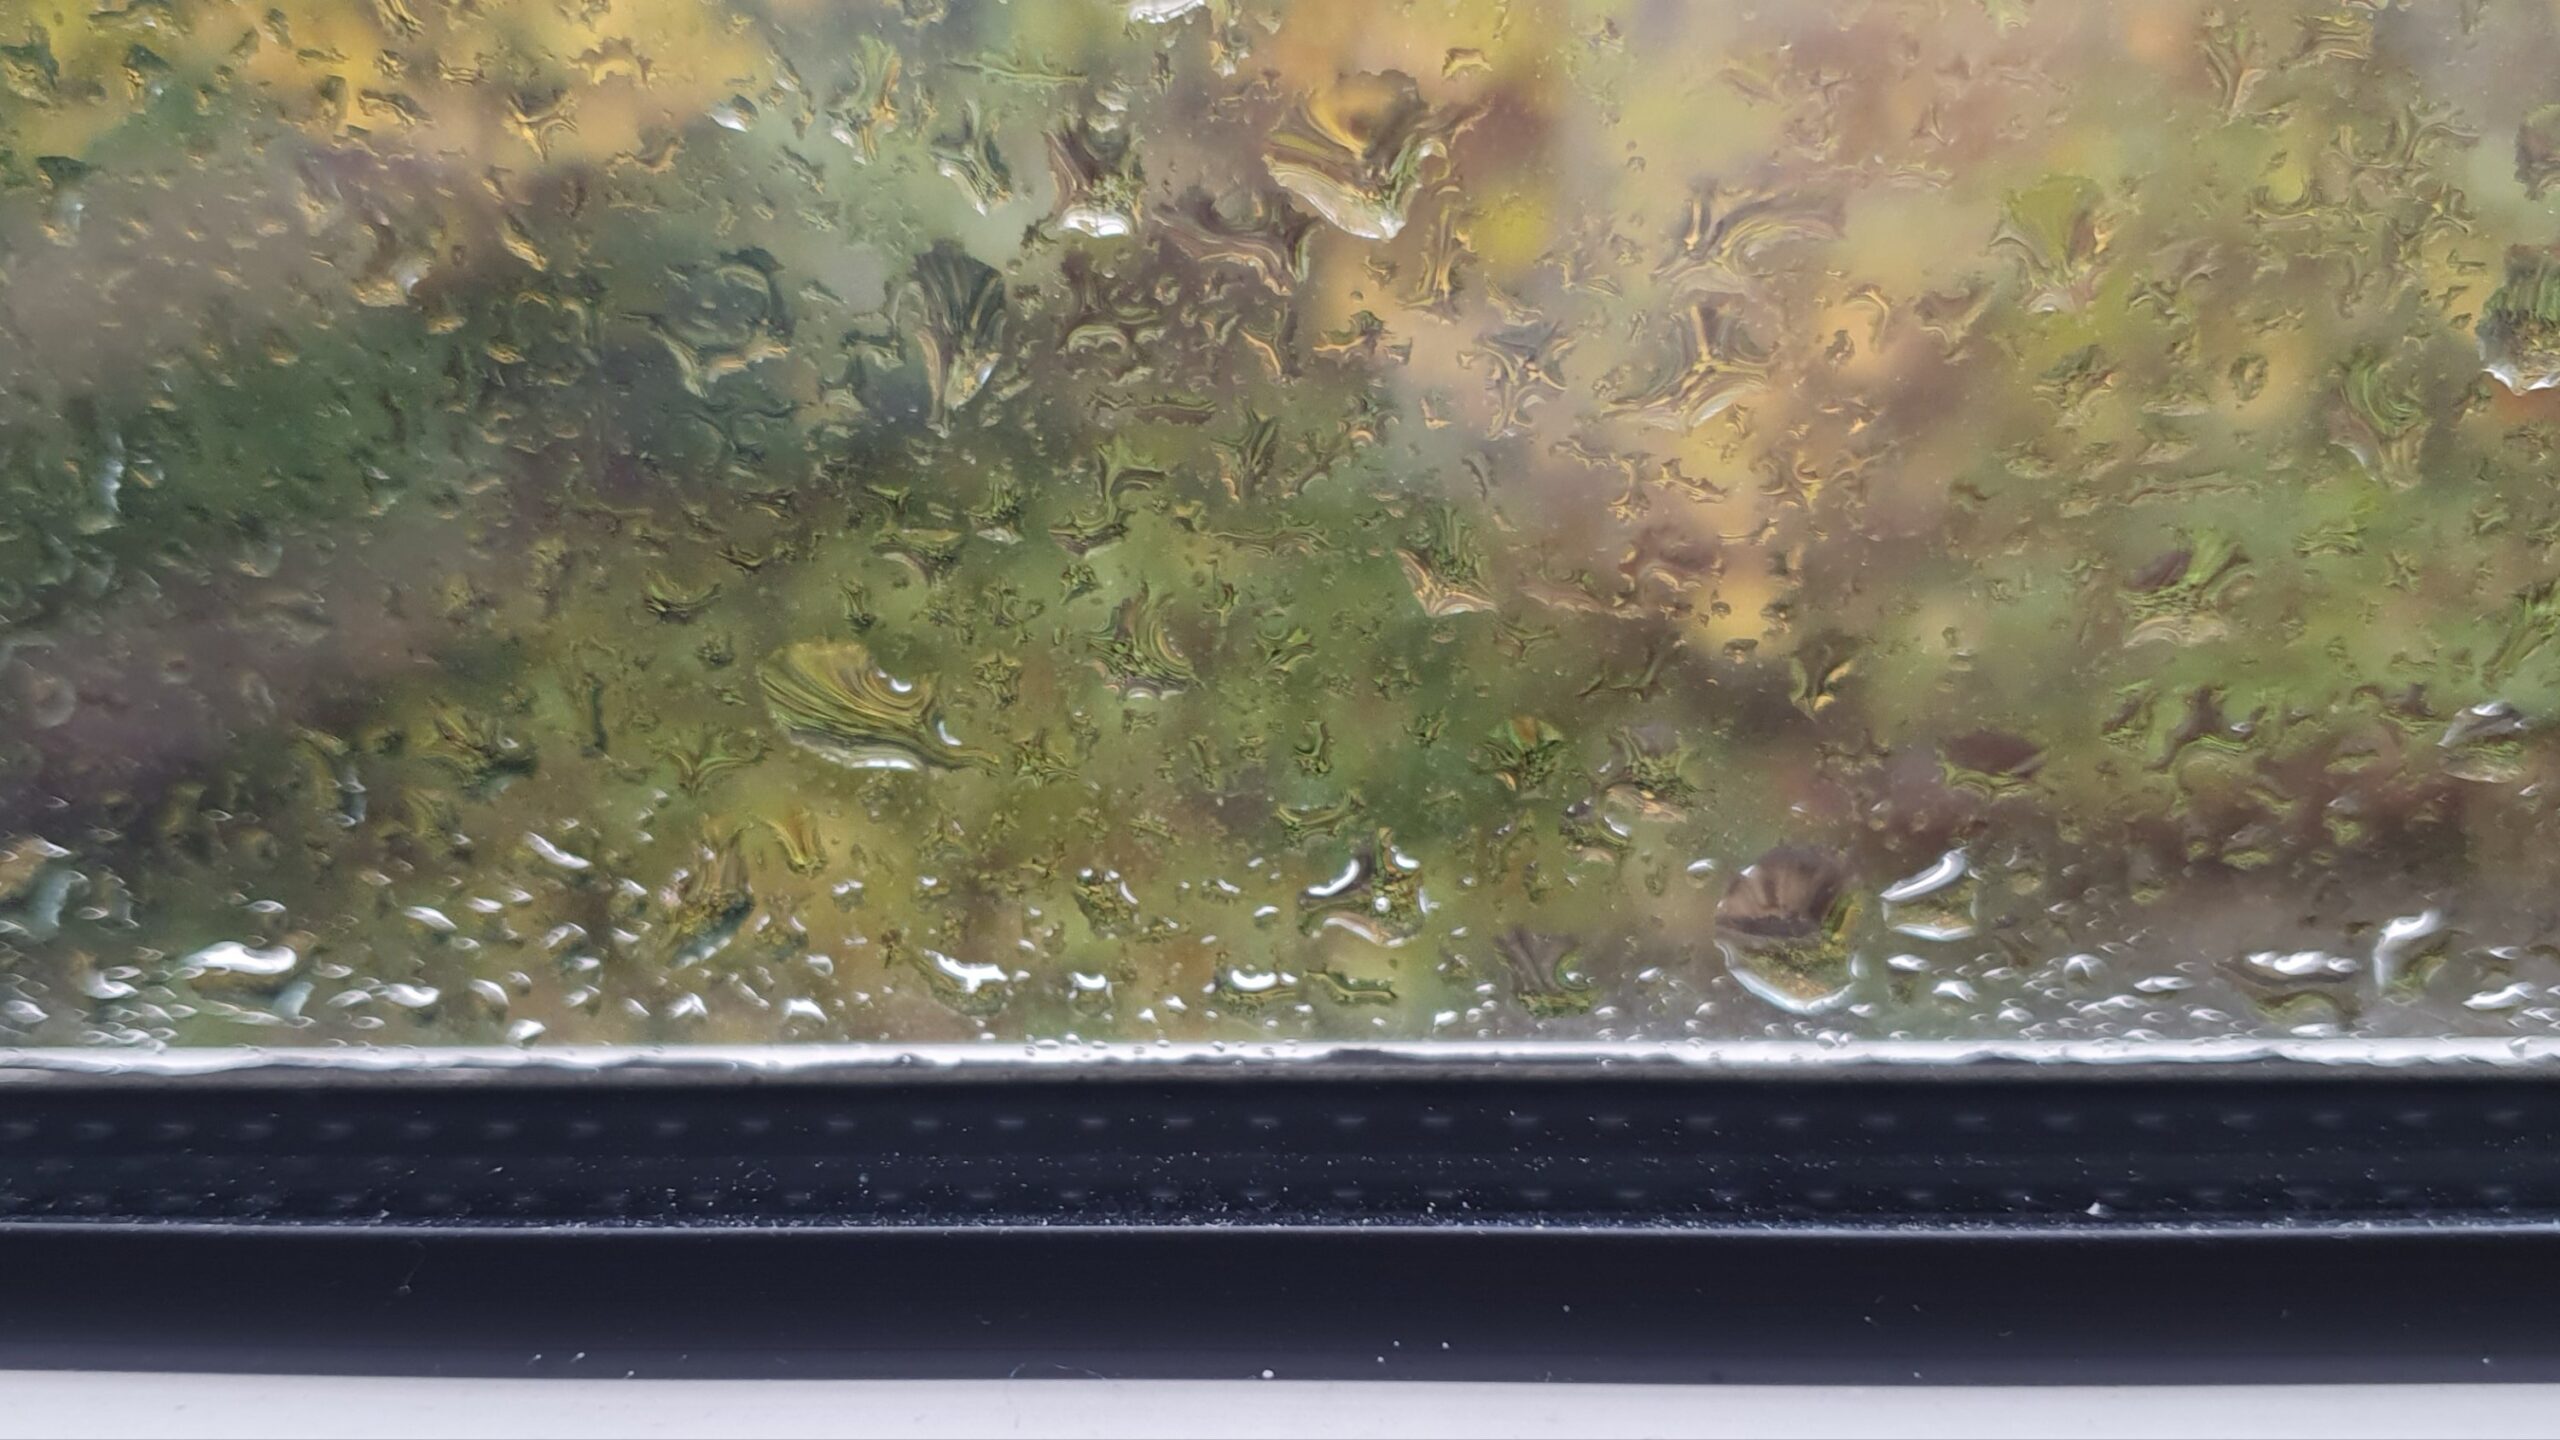 view of the bottom of a window, raindrops on the pane